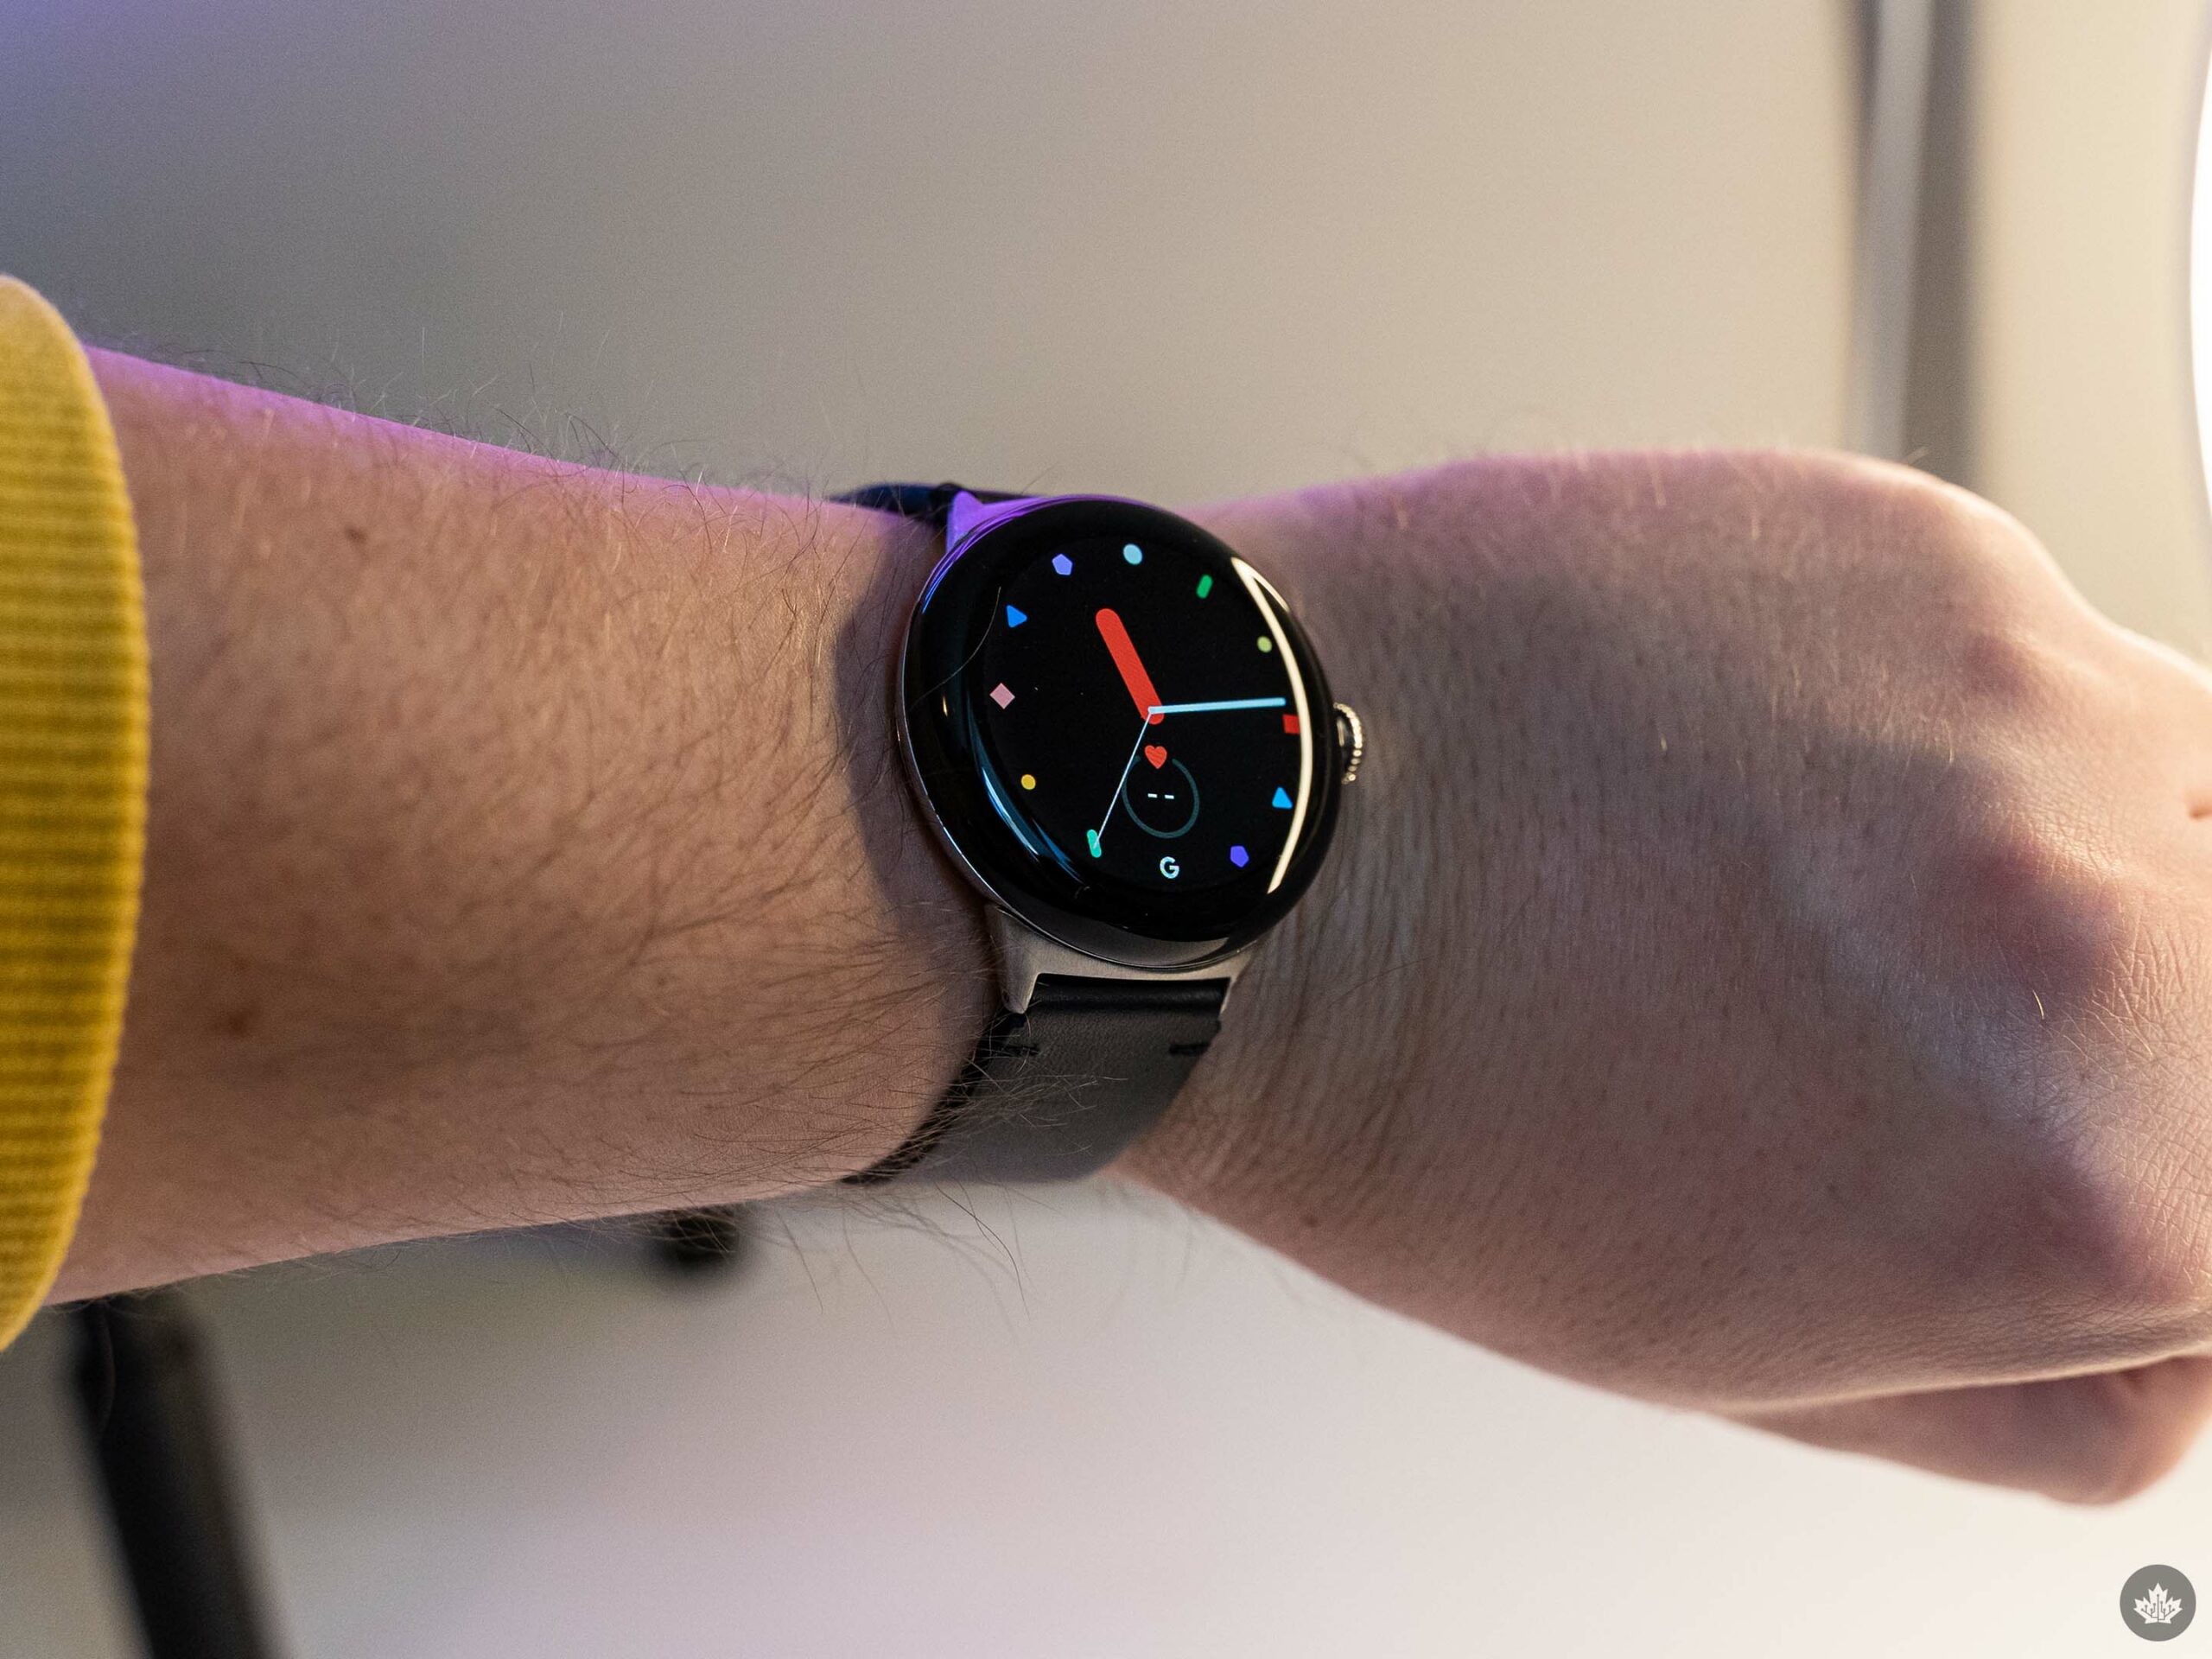 Testing out Pixel Watch bands: Stretch wins the day